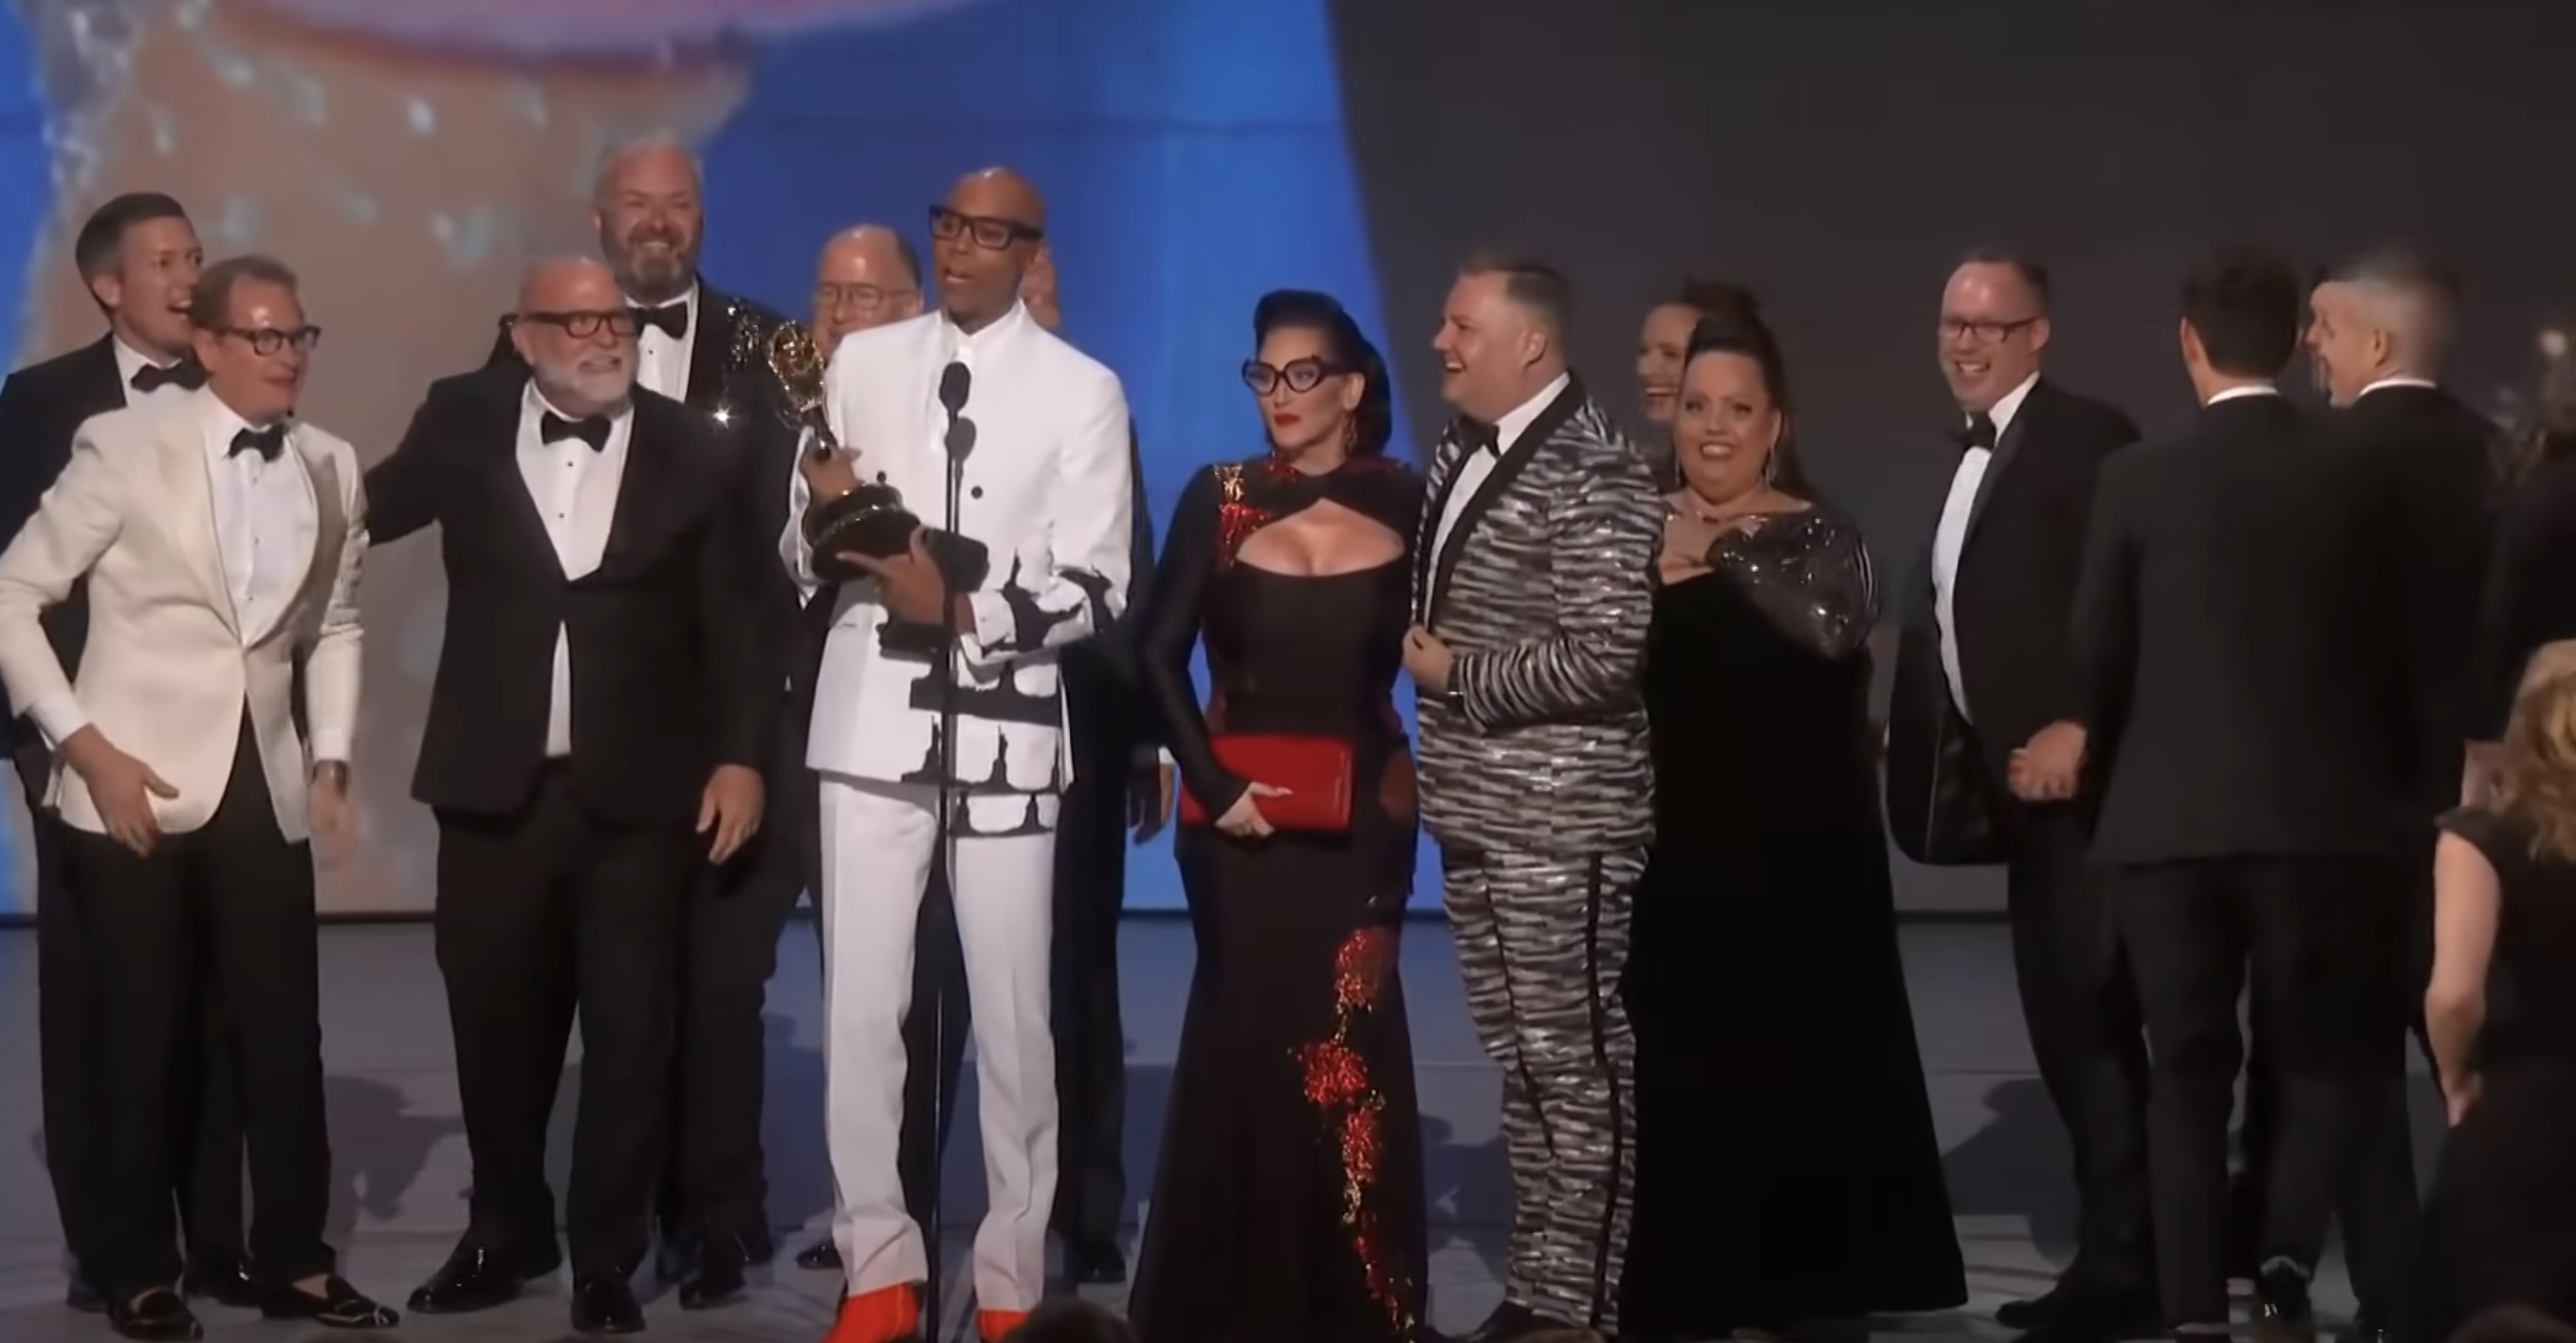 rupaul and the show&#x27;s producers accepting an award on stage